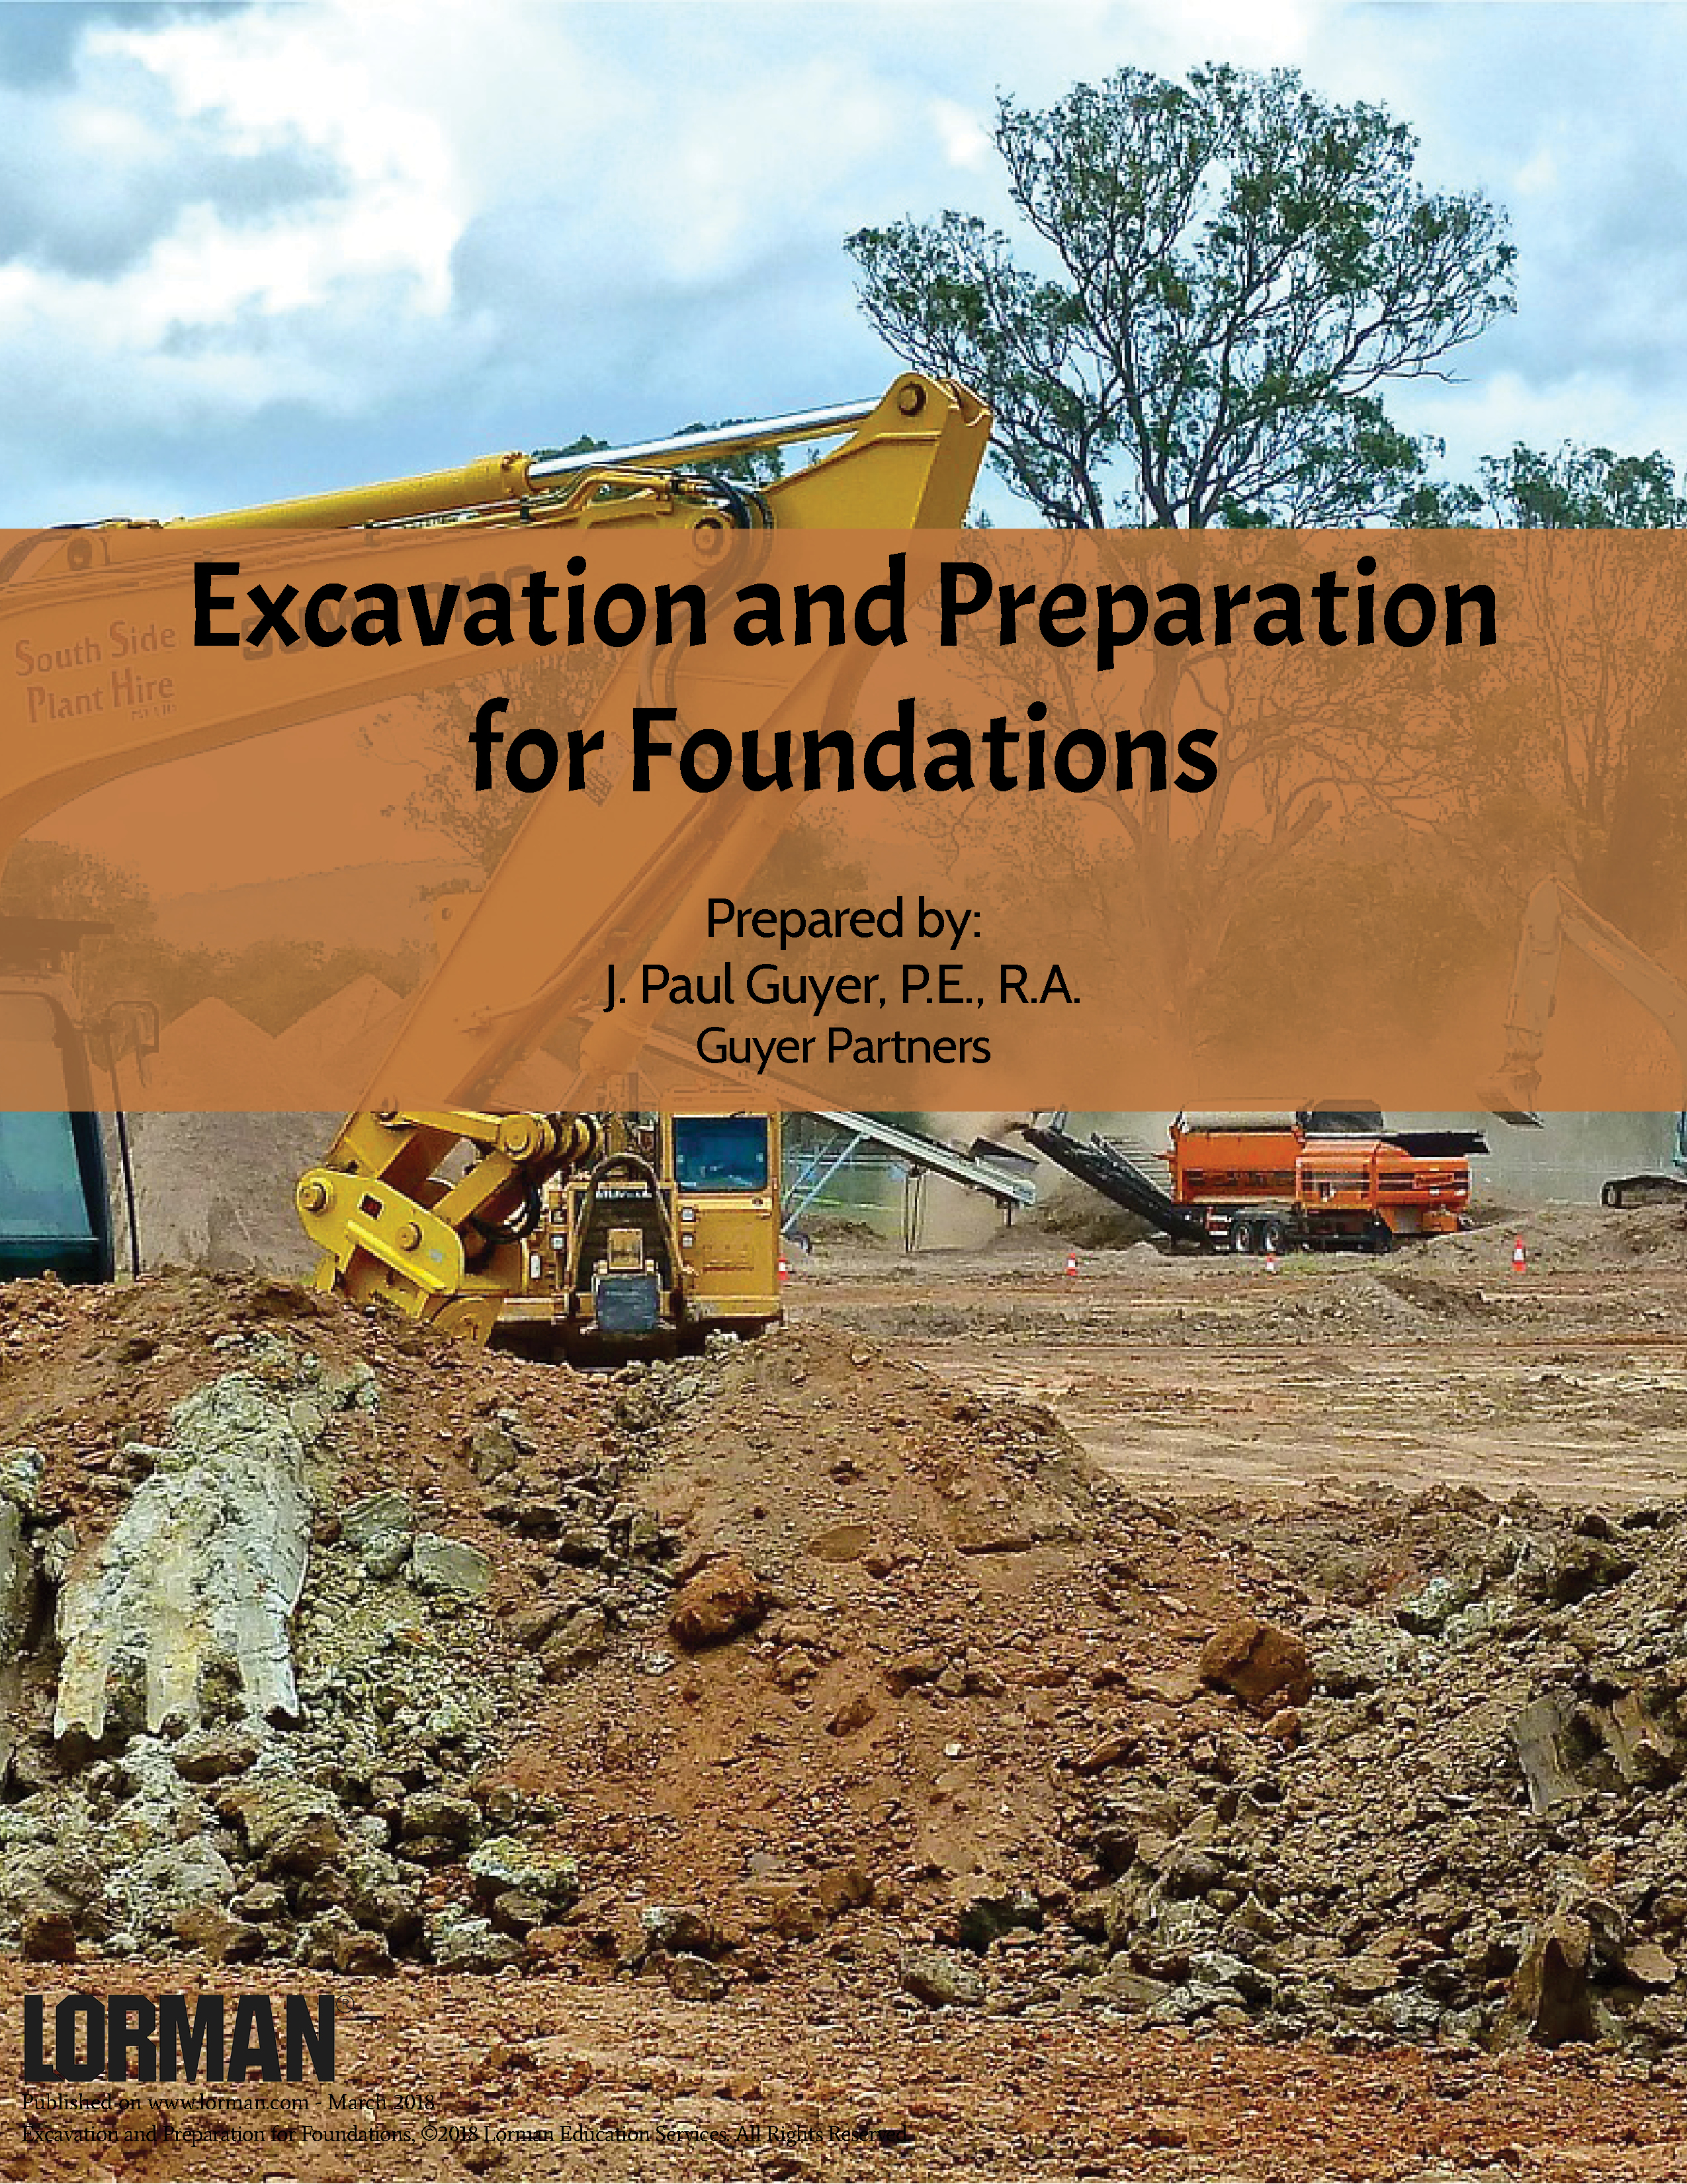 Excavation and Preparation for Foundations